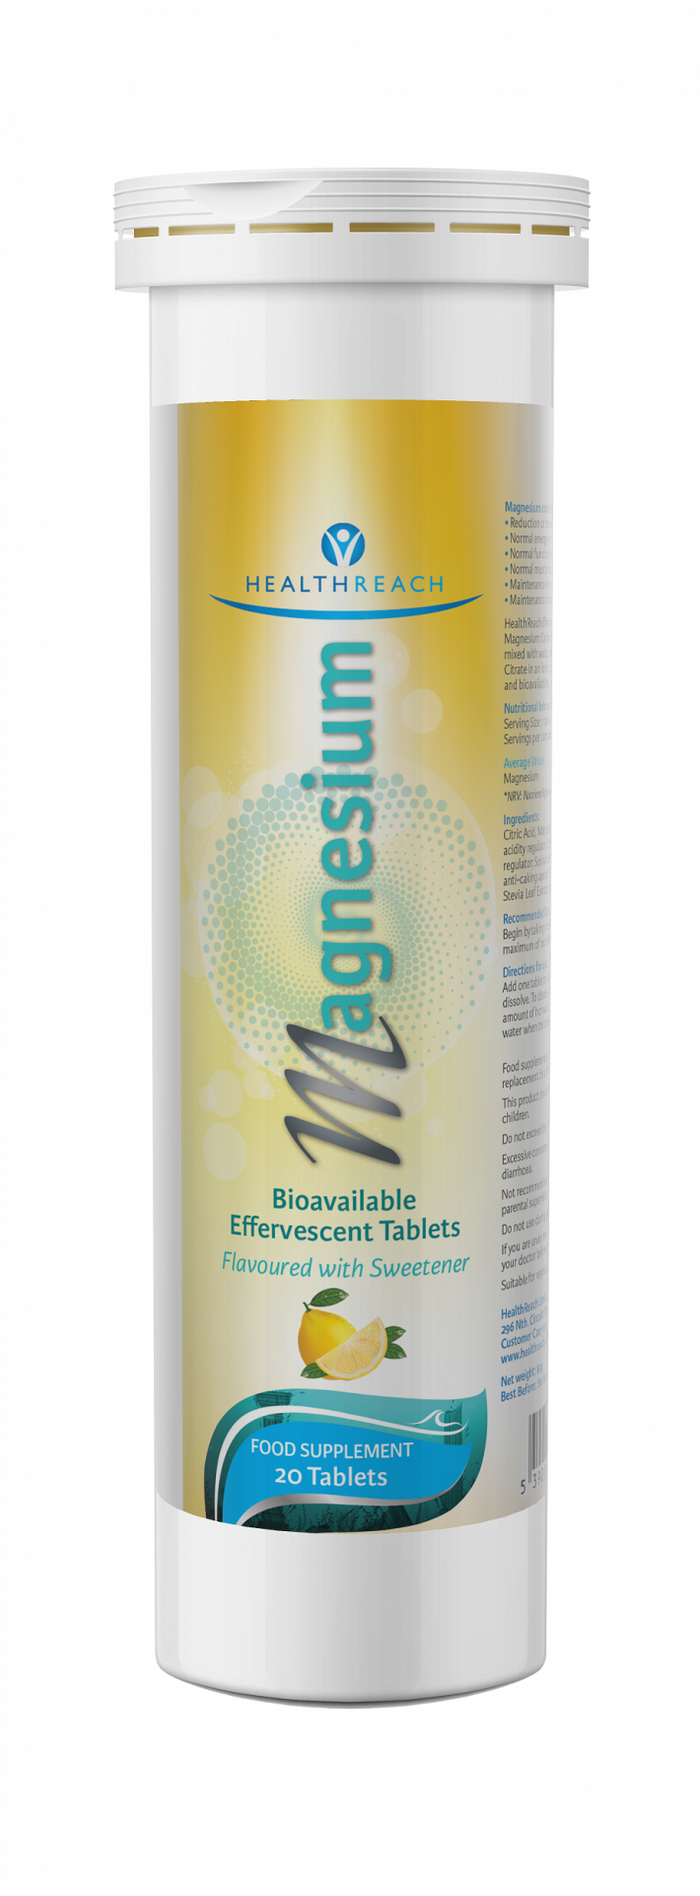 Health Reach Magnesium Bioavailable Effervescent Tablets 20's